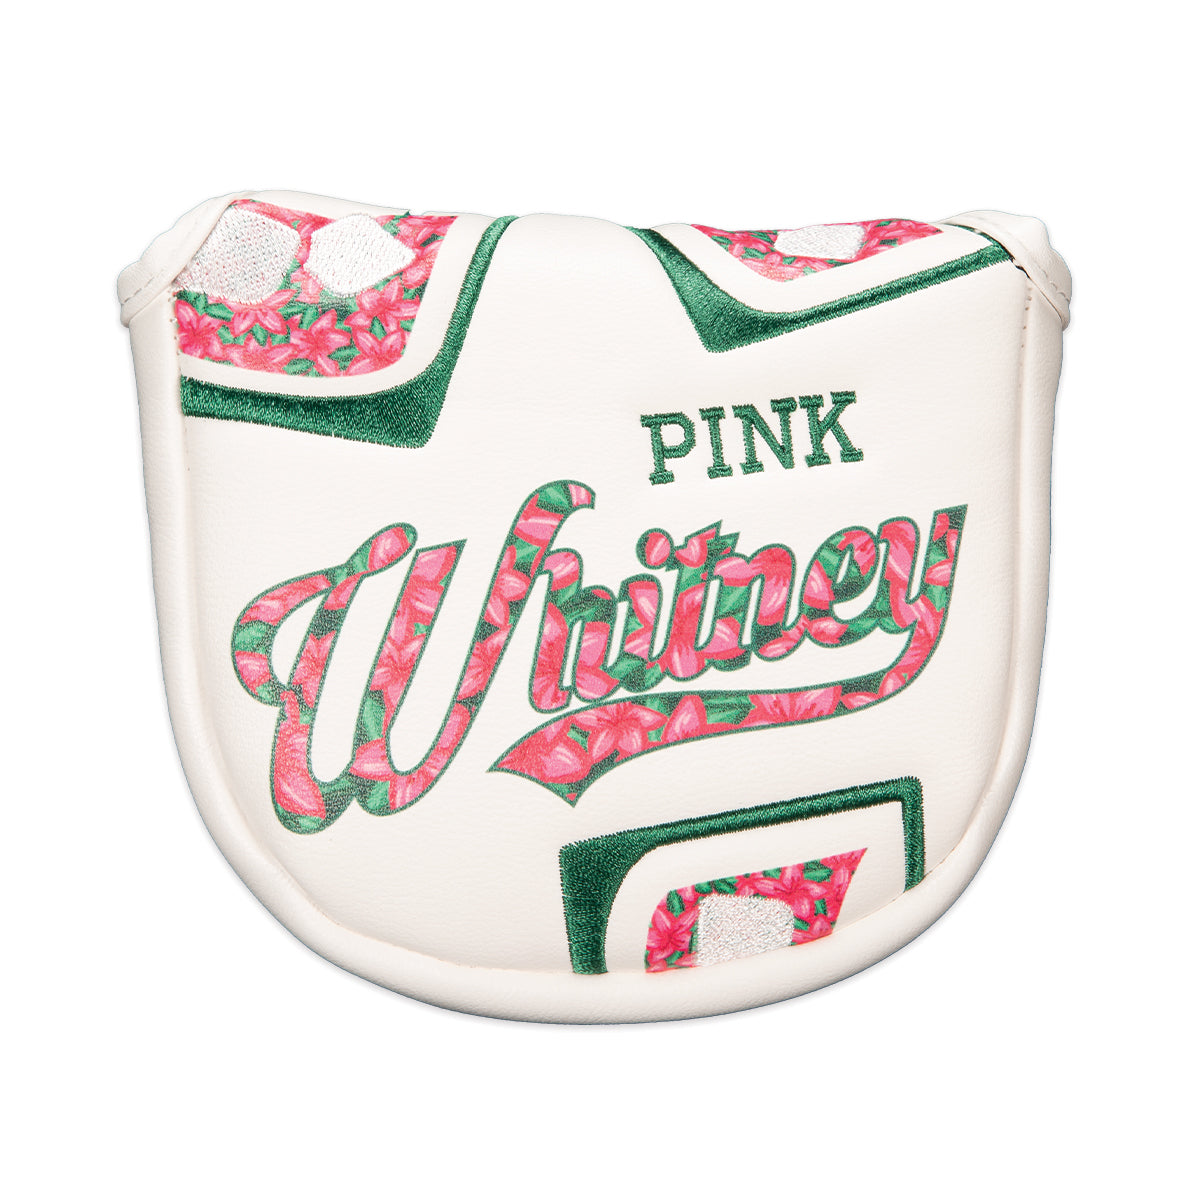 Pink Whitney Flowers Mallet Putter Cover-Golf Accessories-Pink Whitney-White-One Size-Barstool Sports